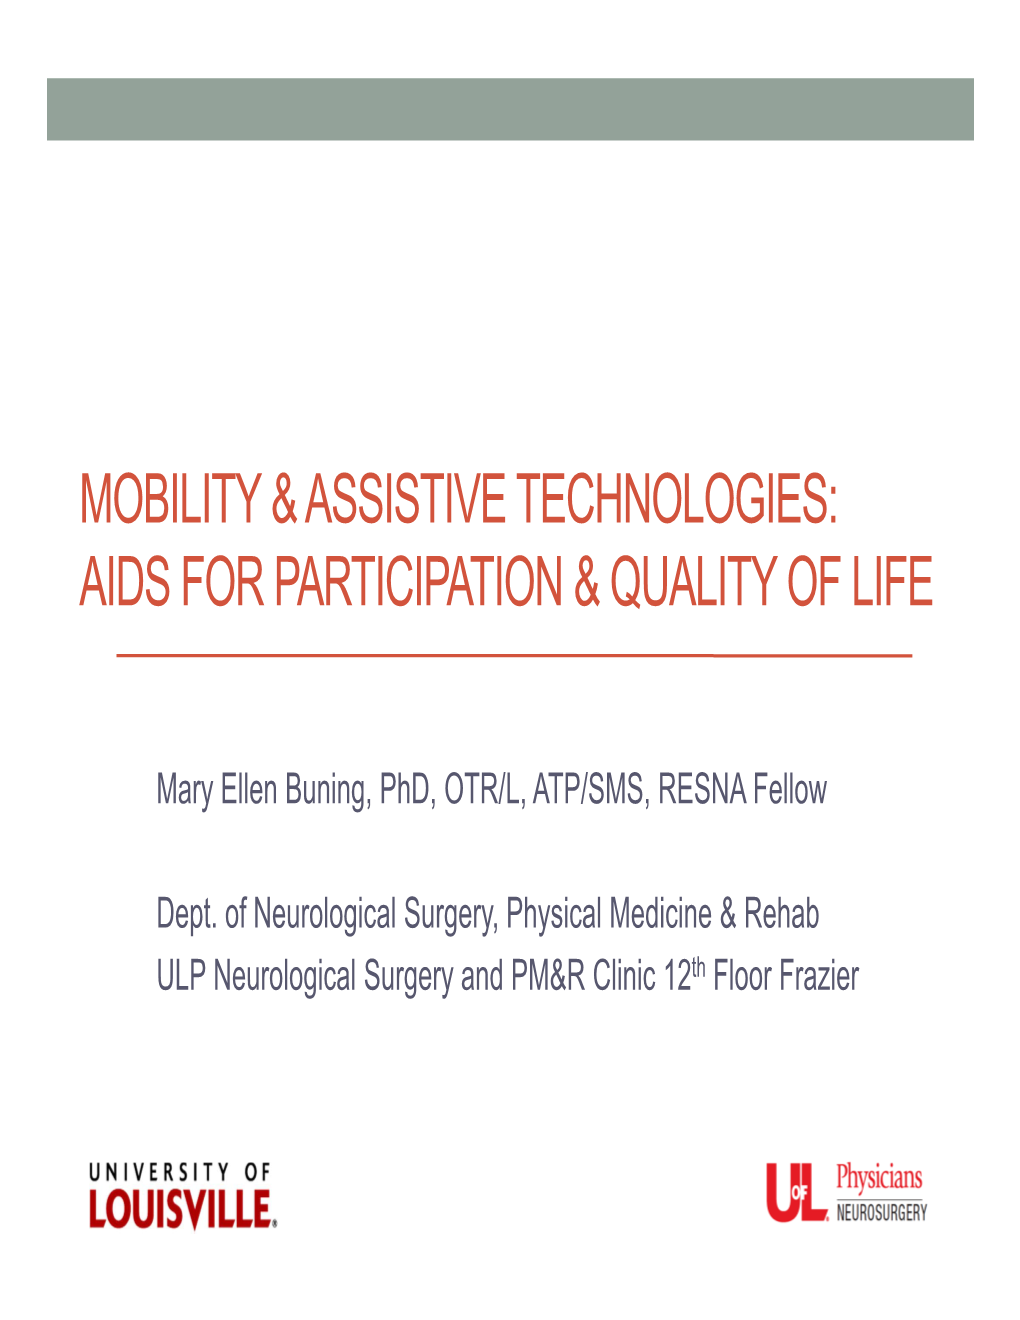 Mobility & Assistive Technologies